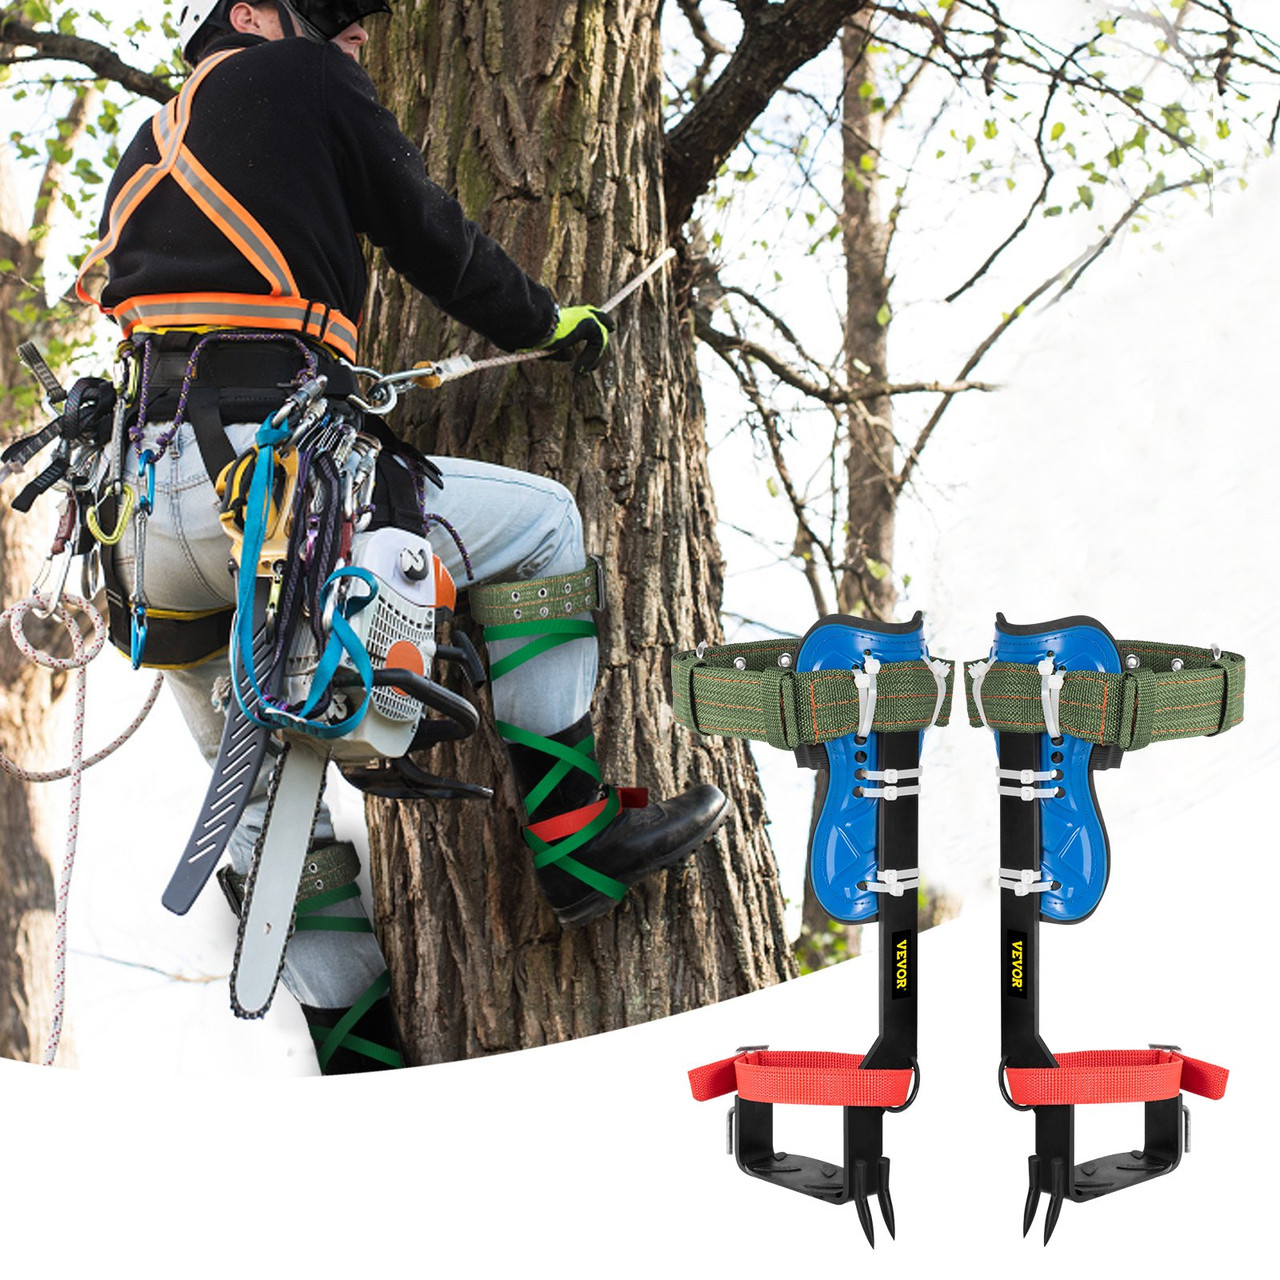 Tree Climbing Spikes, 4 in 1 Alloy Metal Adjustable Pole Climbing Spurs, w/Security Belt & Foot Ankle Straps, Arborist Equipment for Climbers,